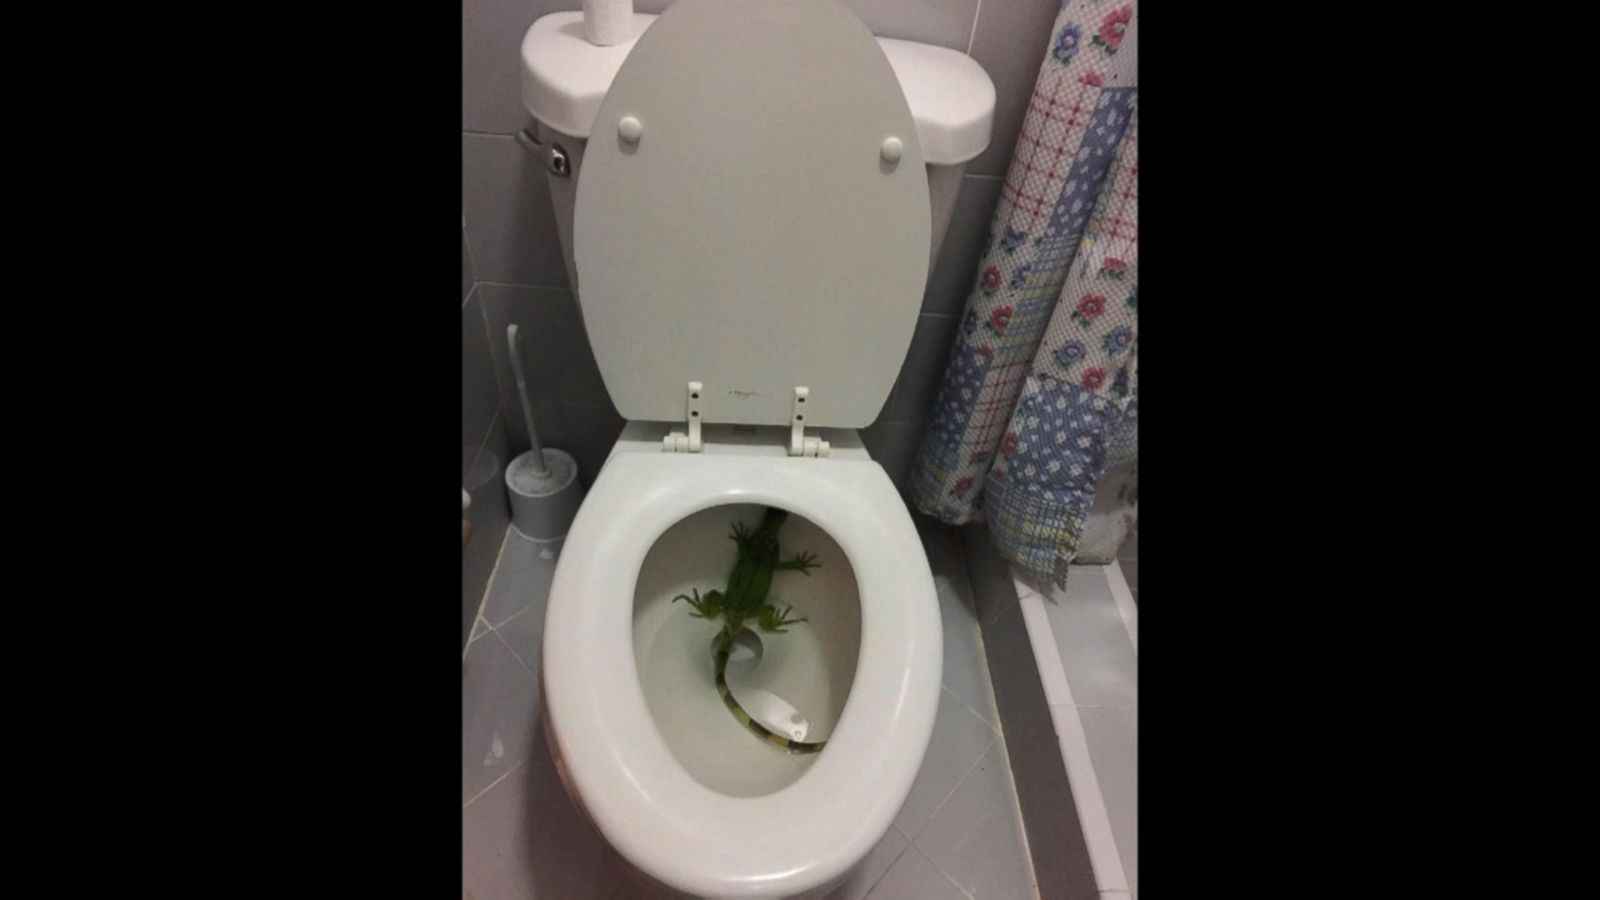 4-Foot Lizard Rescued After Being Stuck in Toilet for Nearly a Week ...